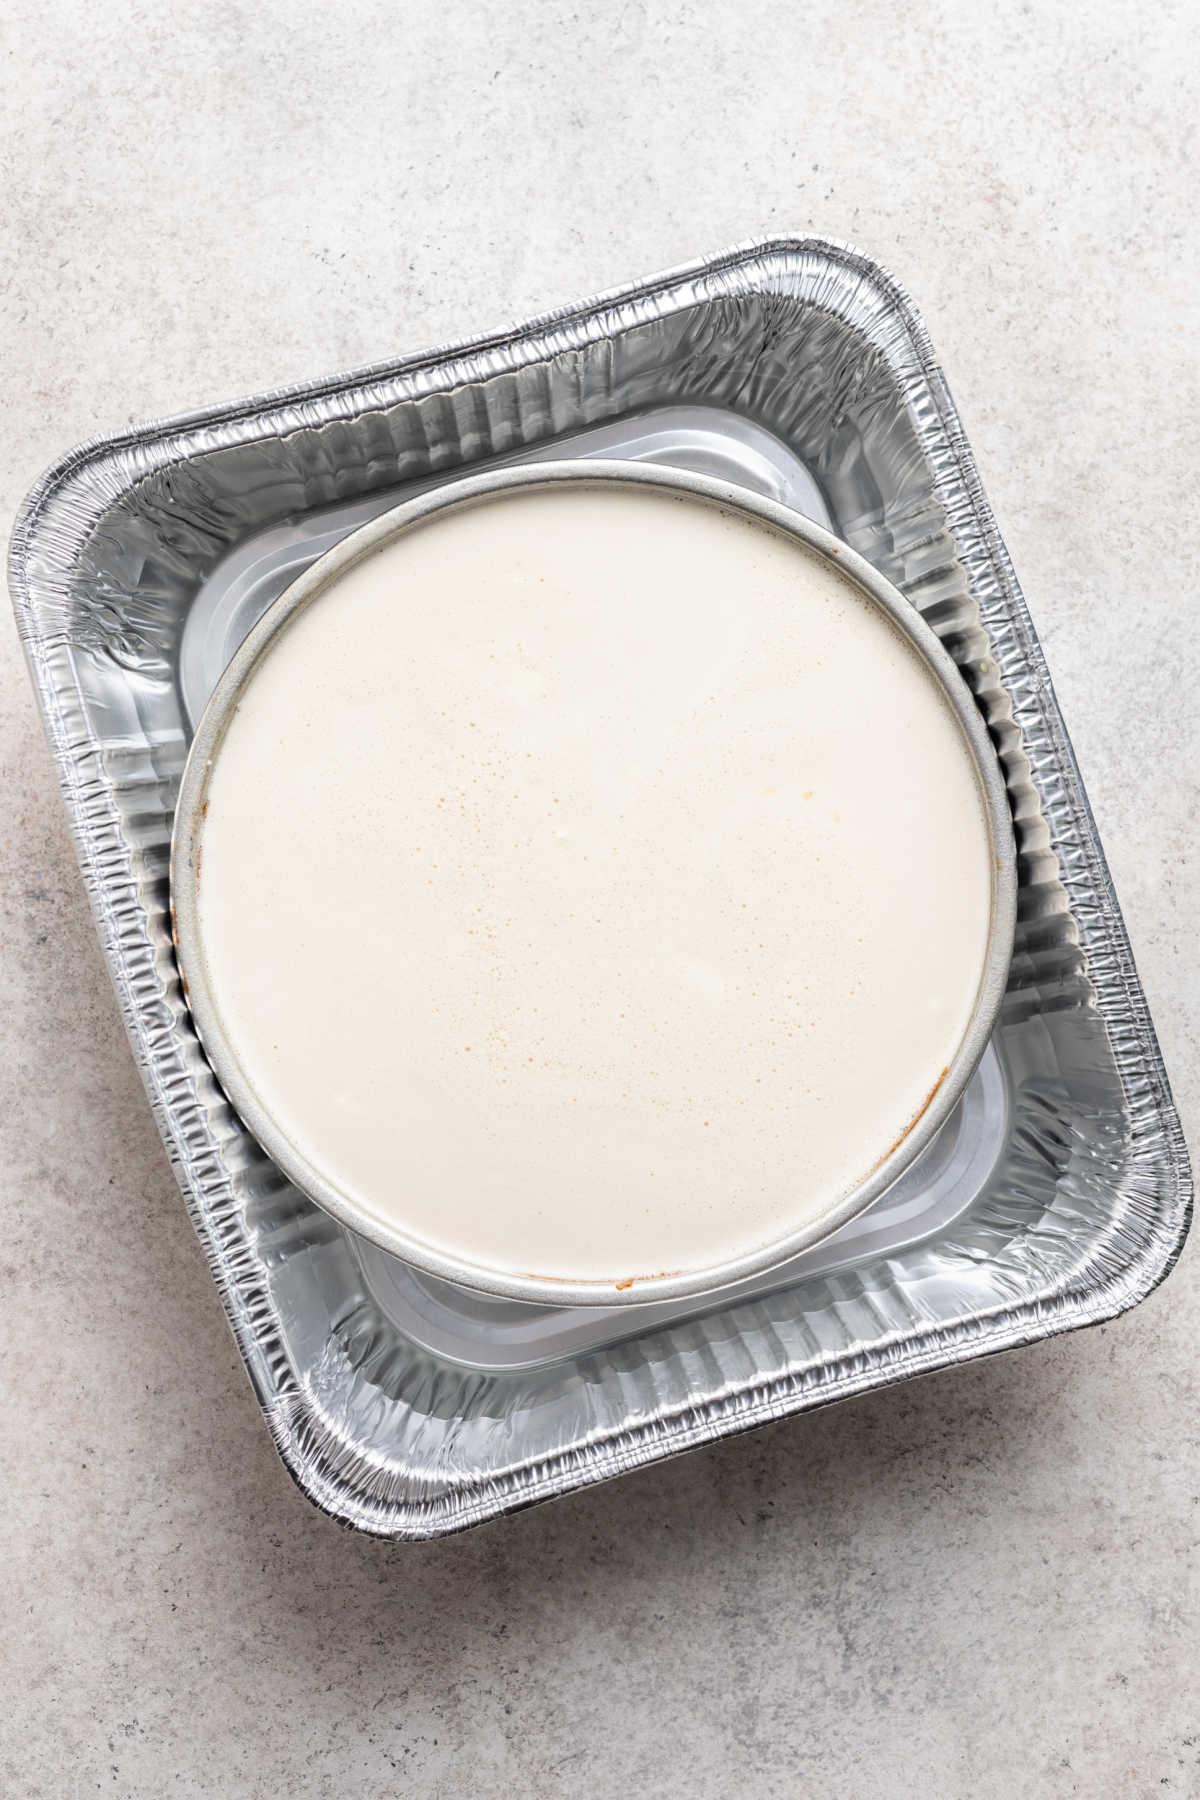 Cream cheese mixture in a round cake pan.